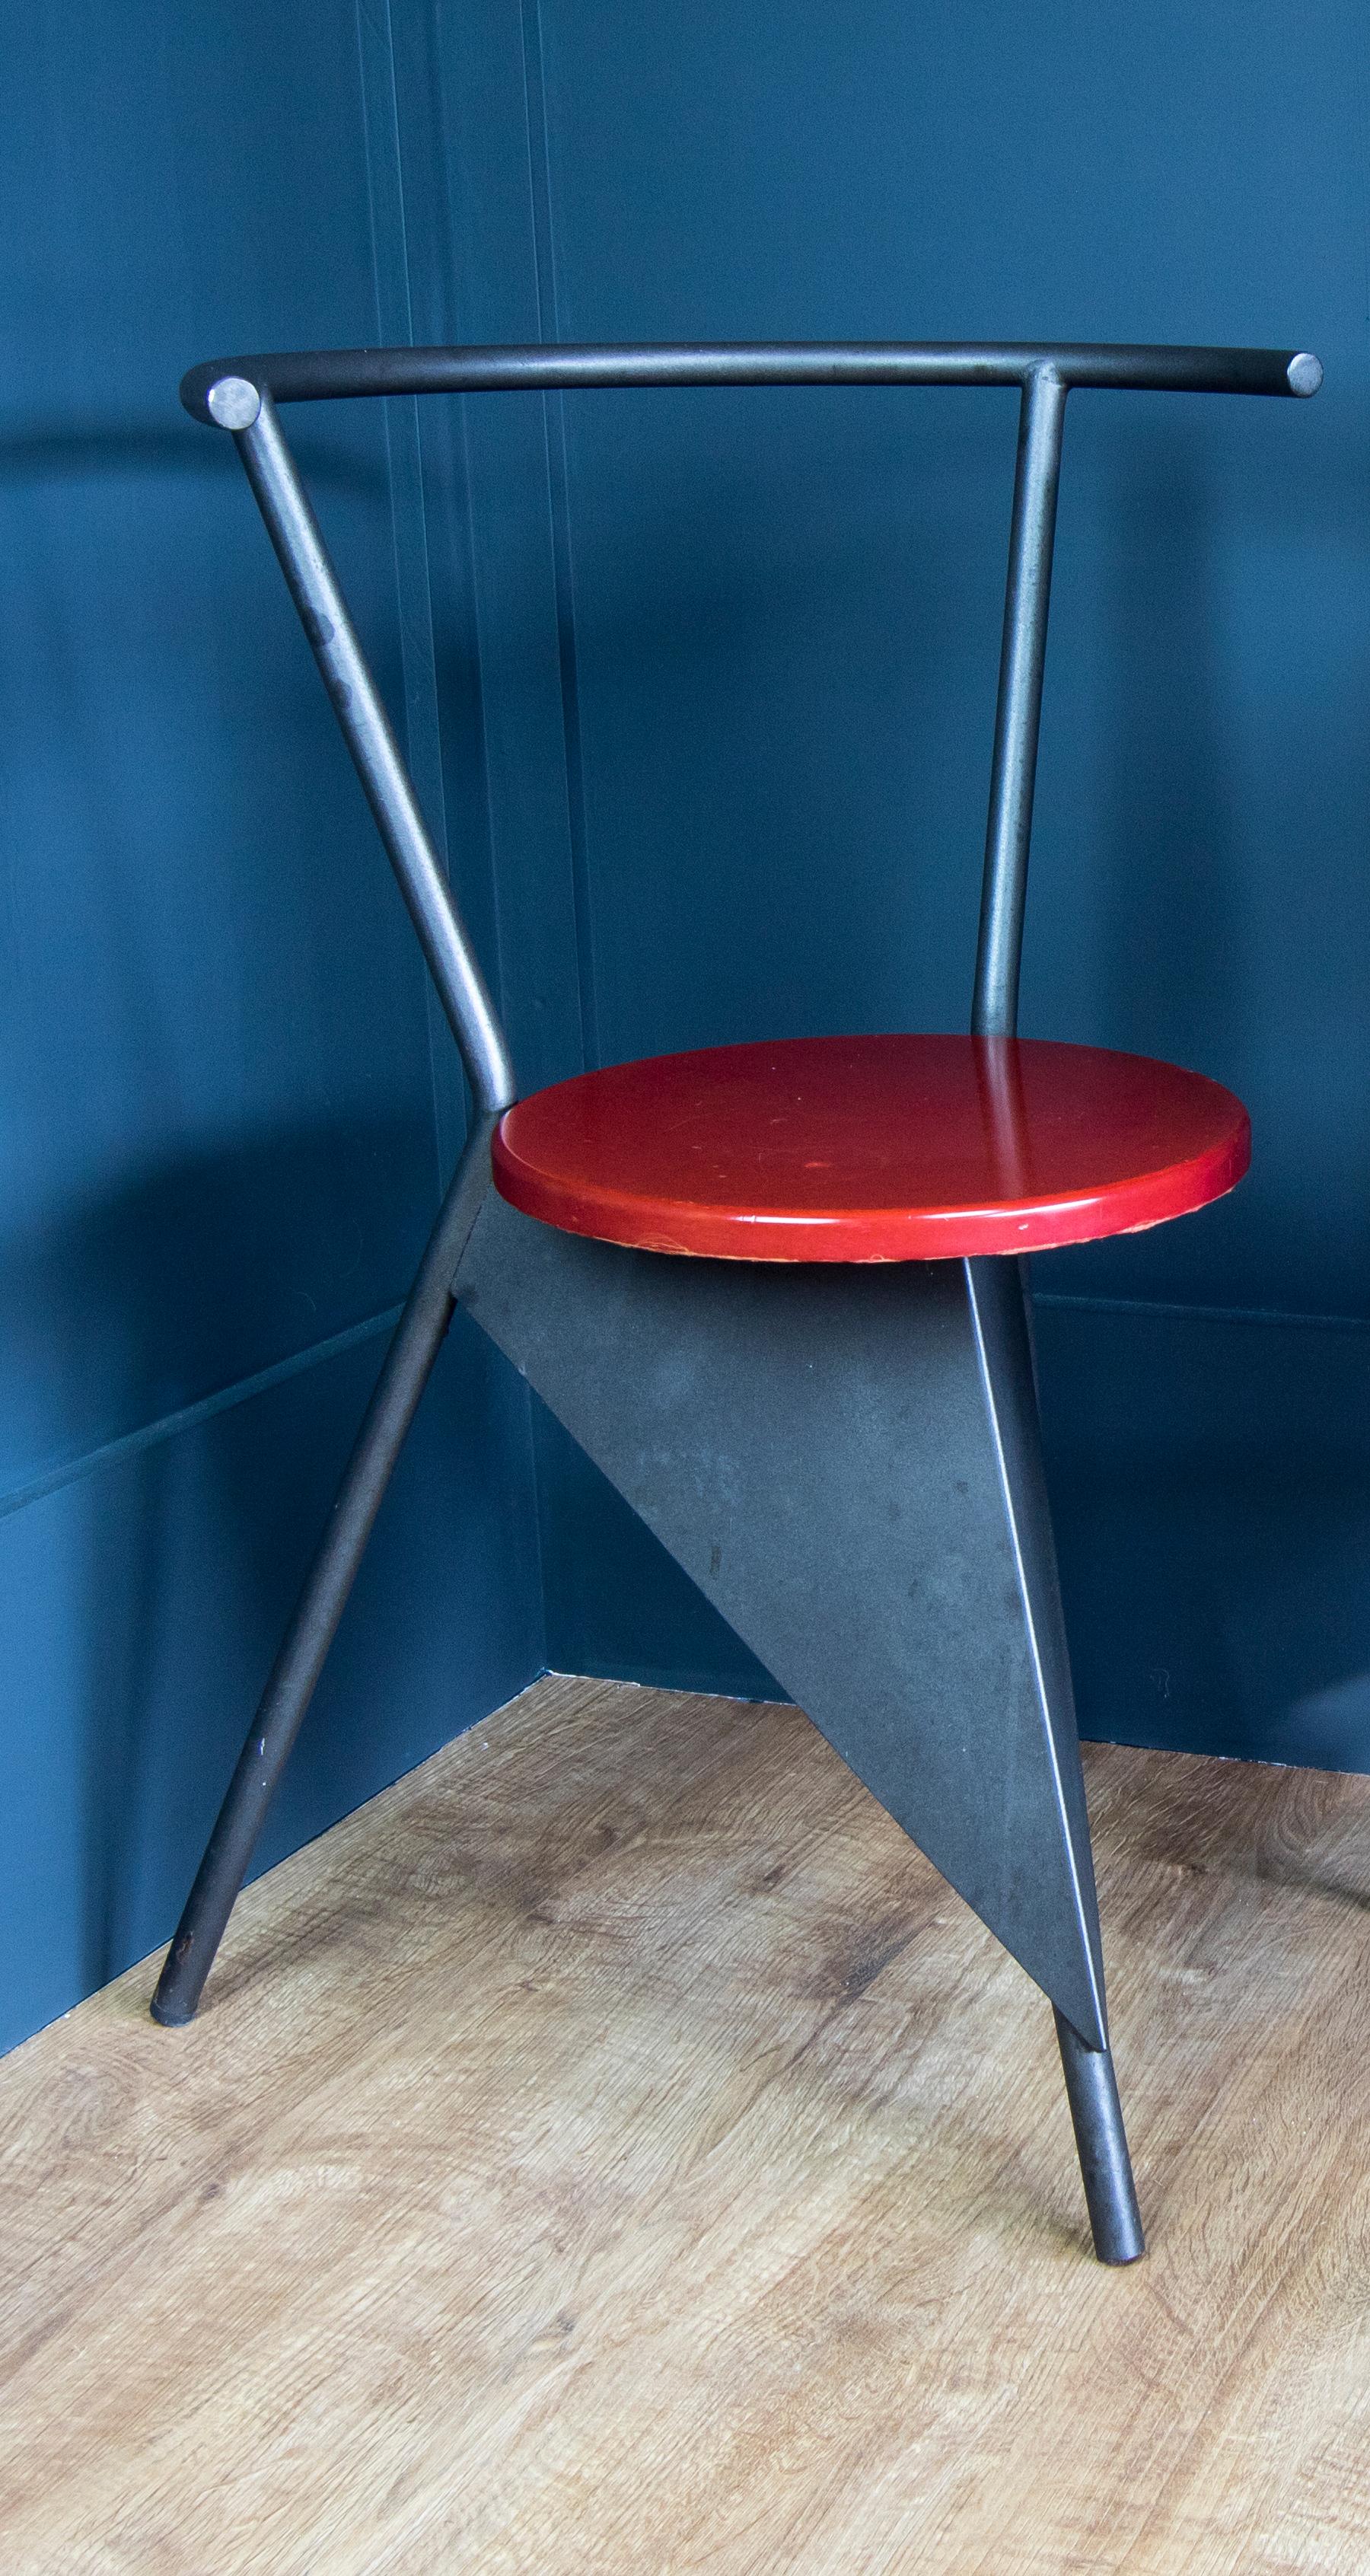 This chair is believed to be from the early 1980s from the Memphis Milano school. Black matt metal with triangular detail and a red formica style seat. Solid construction but showing some patina in line with age. The Memphis style is identified by a